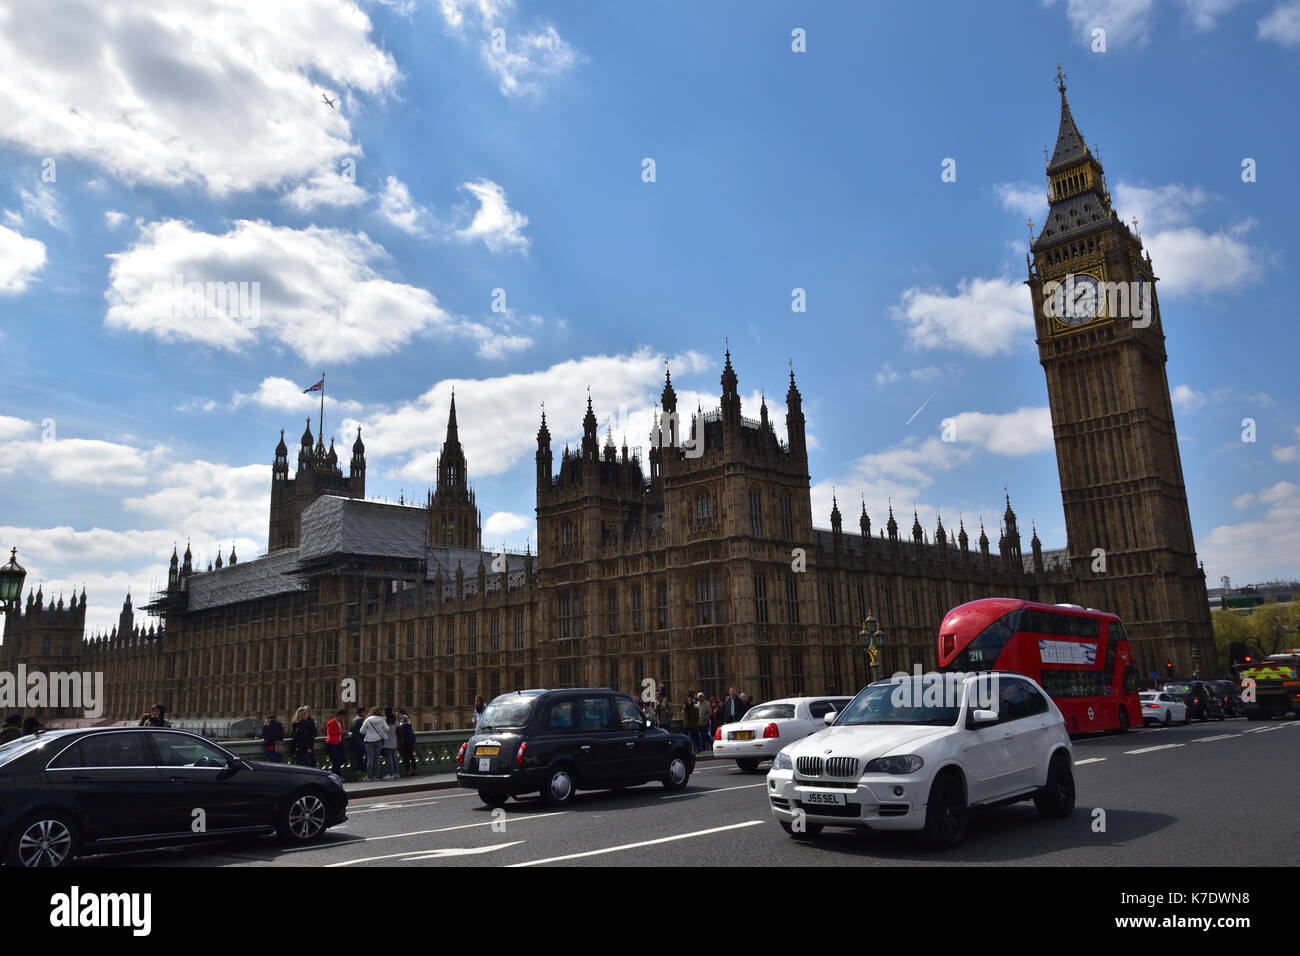 The Palace of Westminster in London is one of the most iconic government buildings worldwide. With Big Ben and bus in front it is a great travel pic Stock Photo